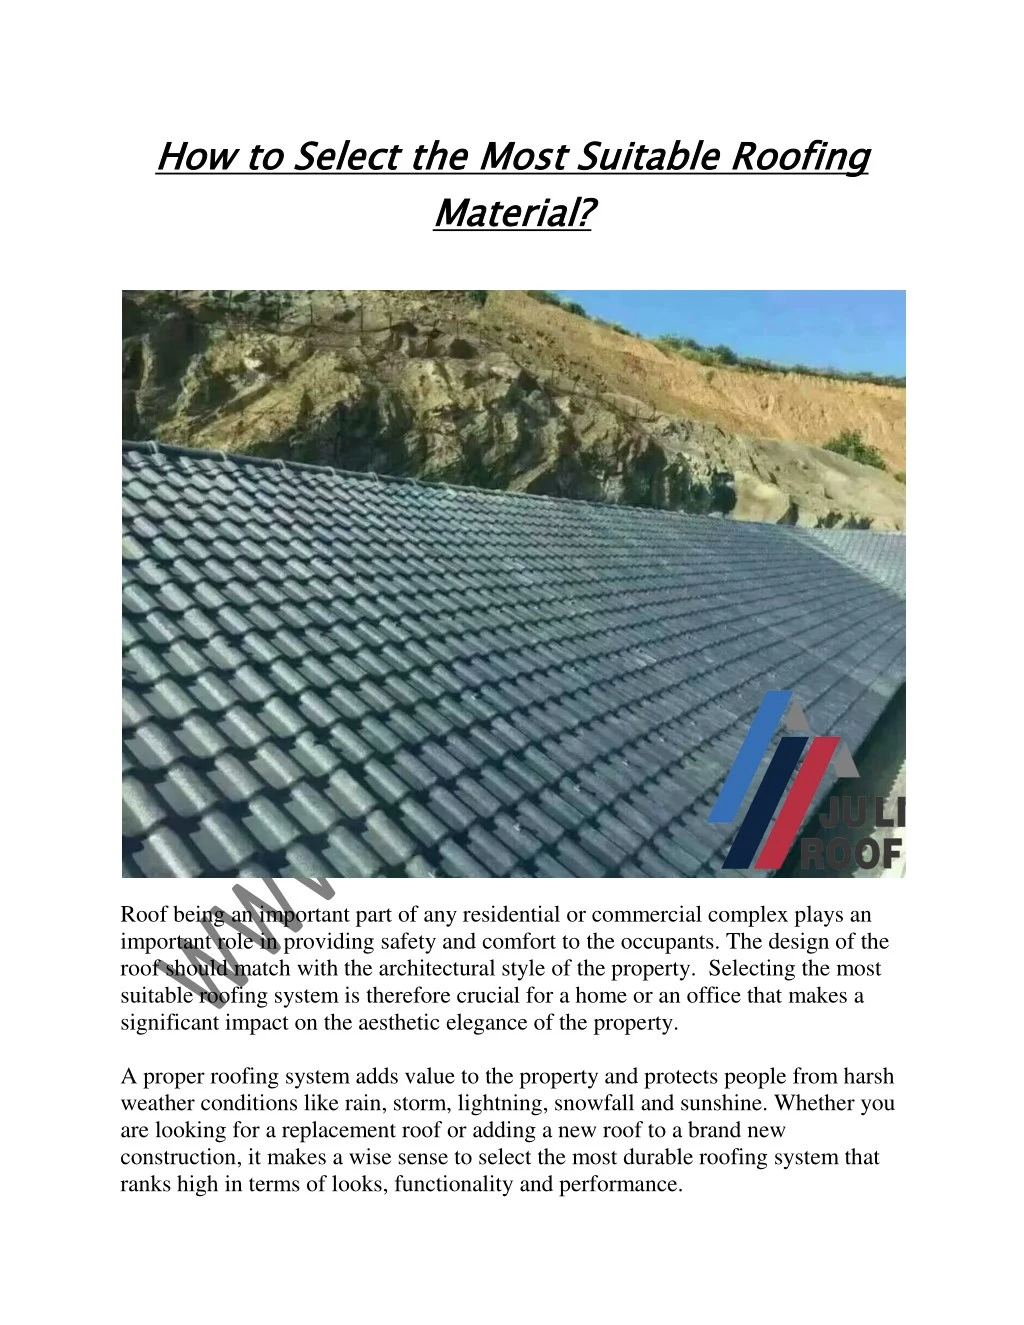 how to select the most suitable roofing material